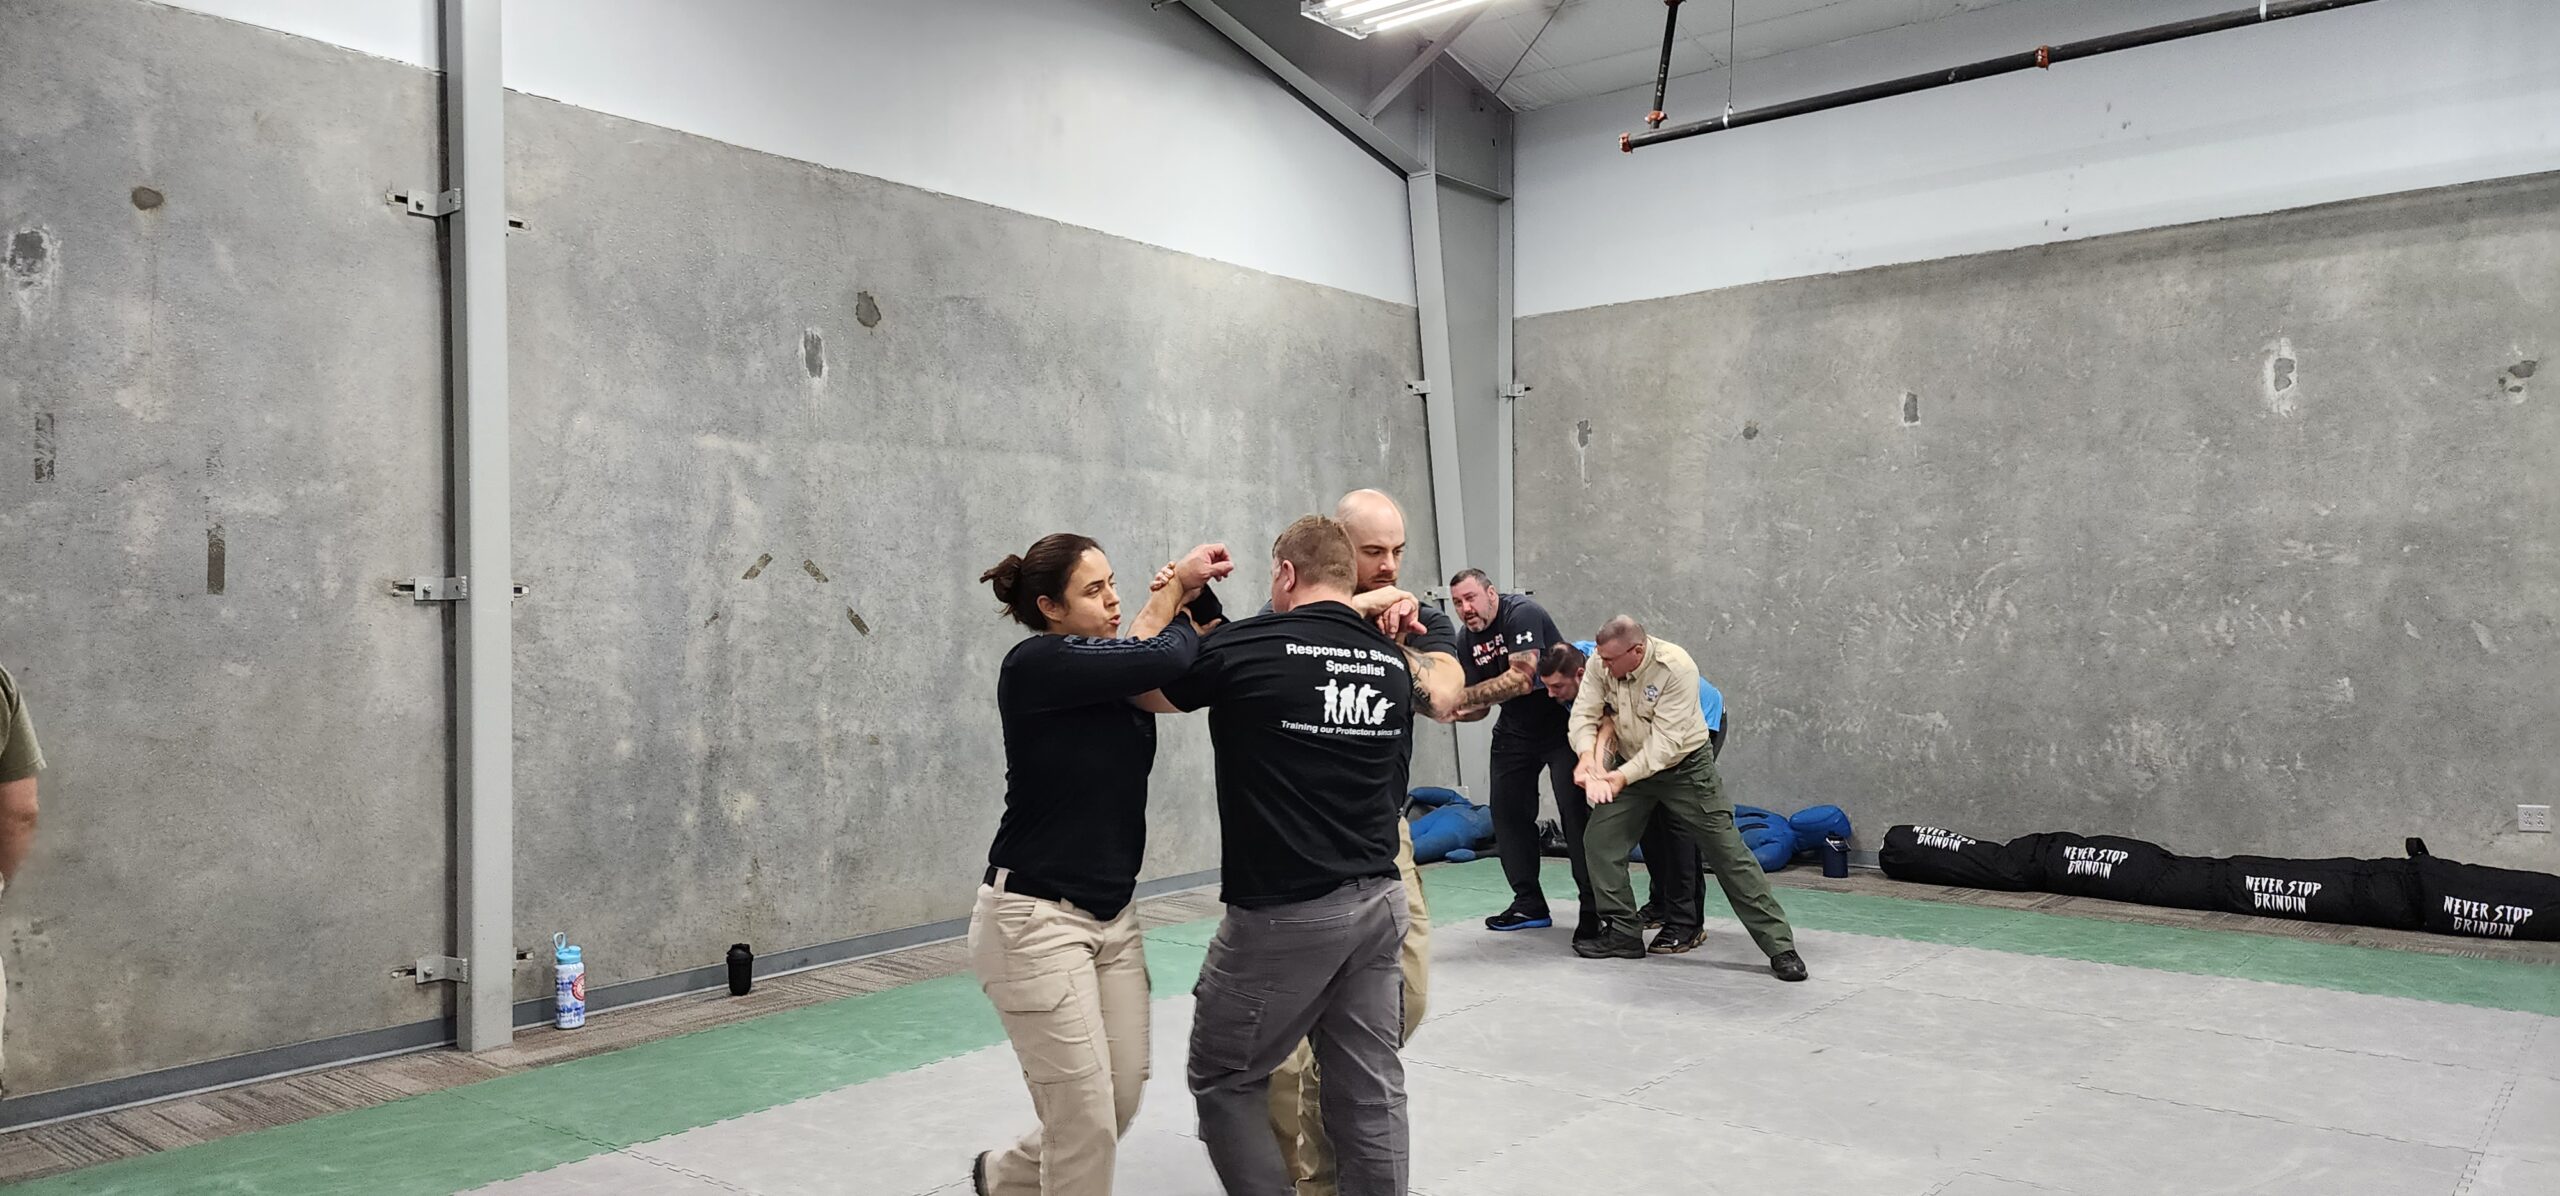 Reacting with Precision: Defense Tactics For Law Enforcement